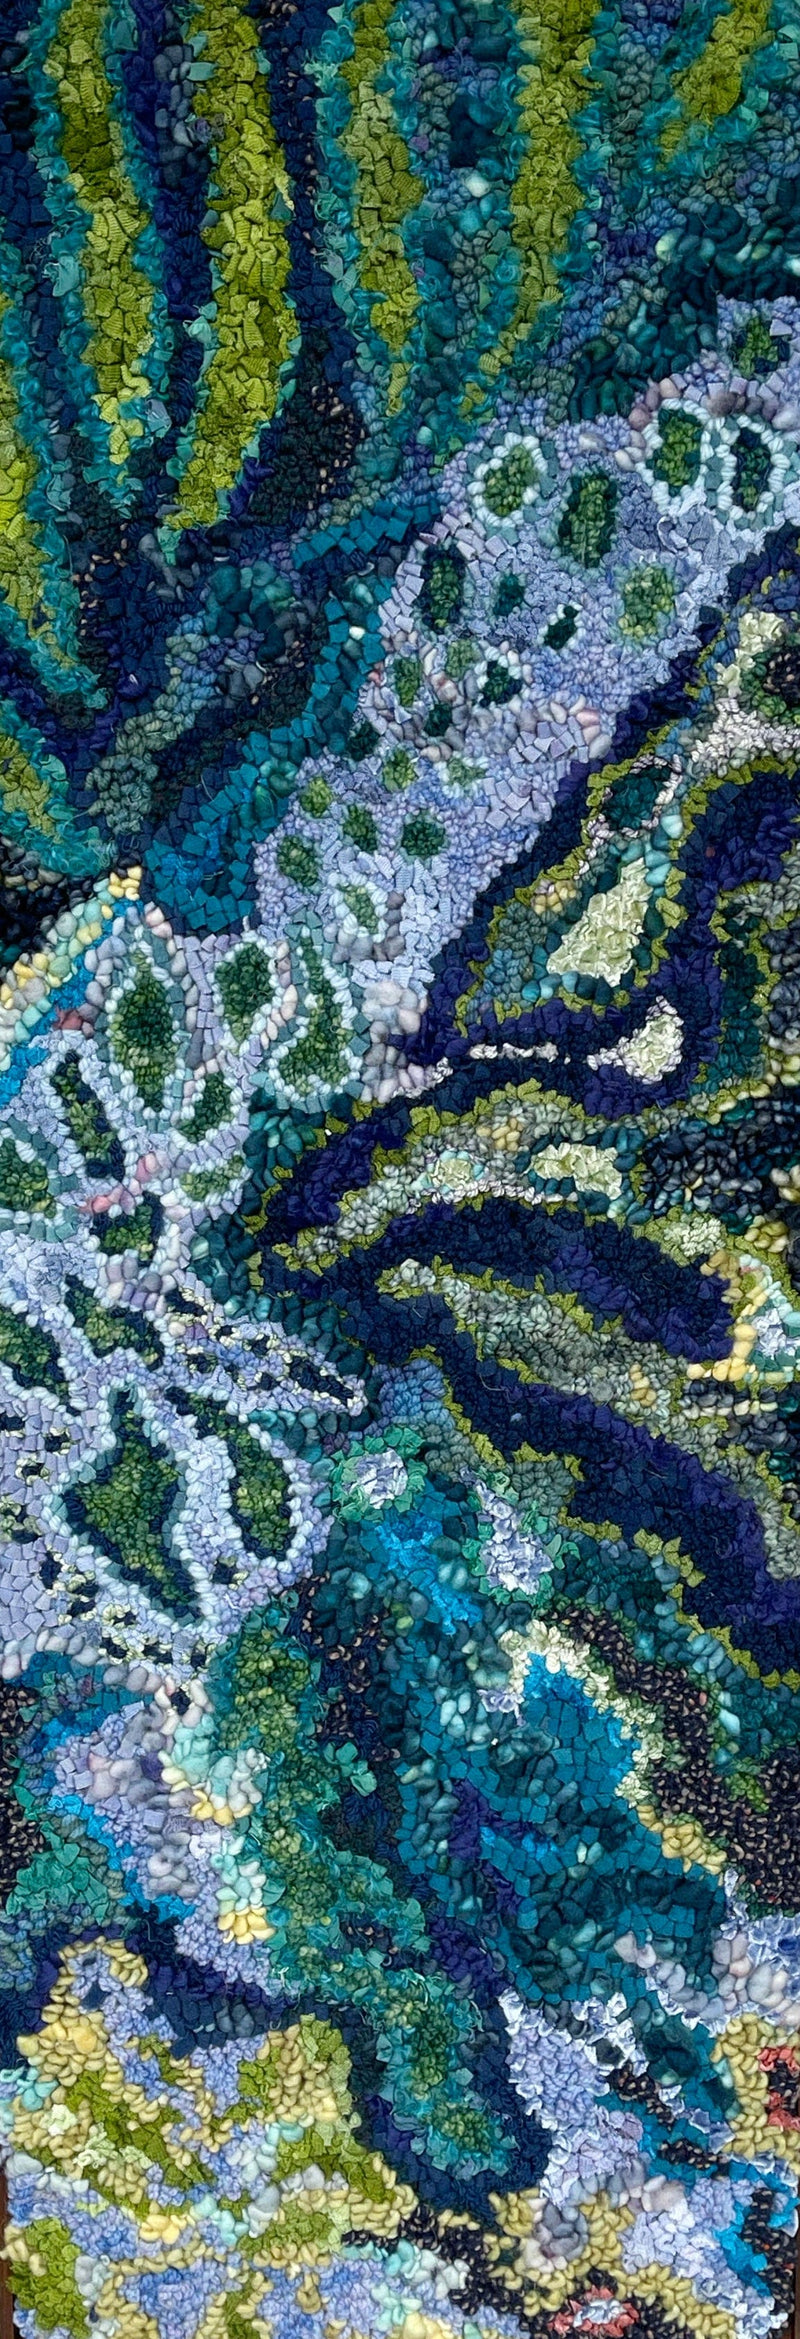 update alt-text with template Sea Garden Abstract - 14" x 40" - Linen Pattern Only or Complete Kit-Kits-Deanne Fitzpatrick Rug Hooking Studio-Rug Hooking Kit -Rug Hooking Pattern -Rug Hooking -Deanne Fitzpatrick Rug Hooking Studio -Is rug hooking the same as punch needle?